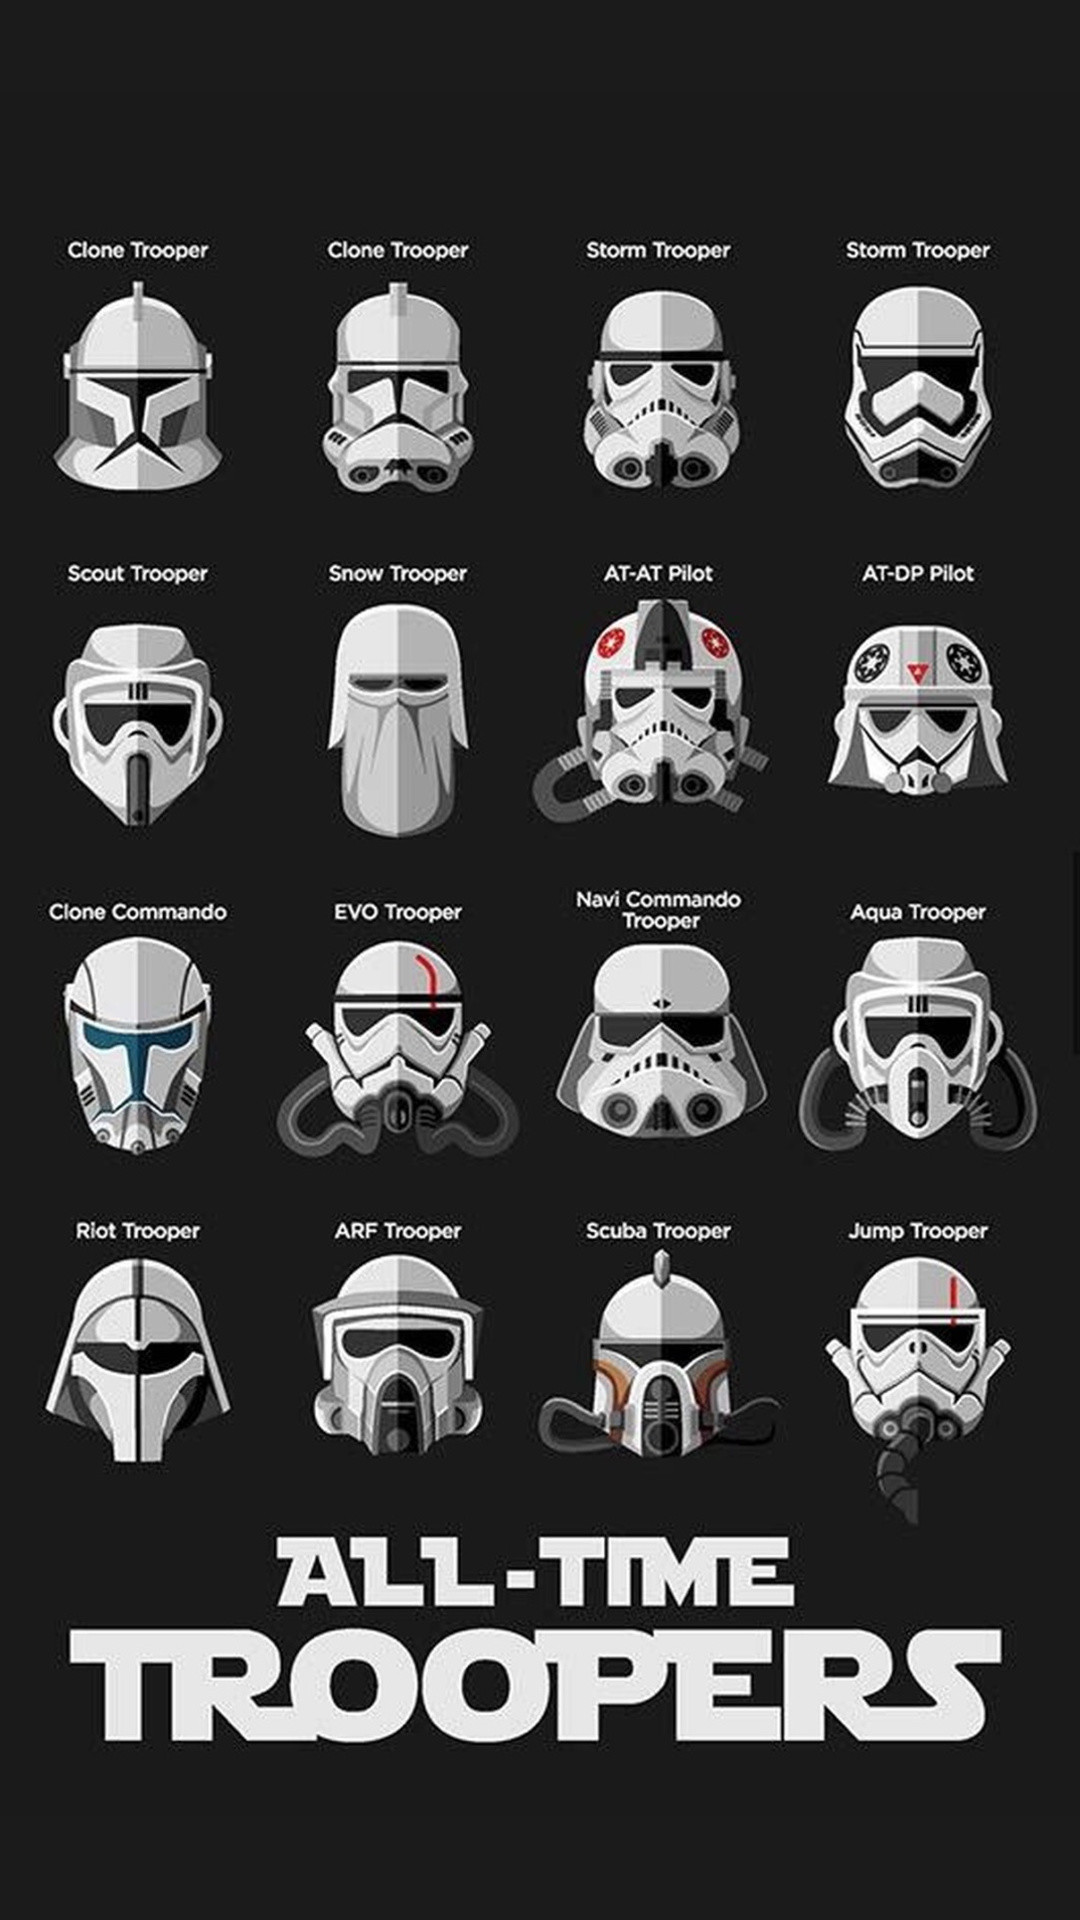 1080x1920 Star Wars All-Time Troopers